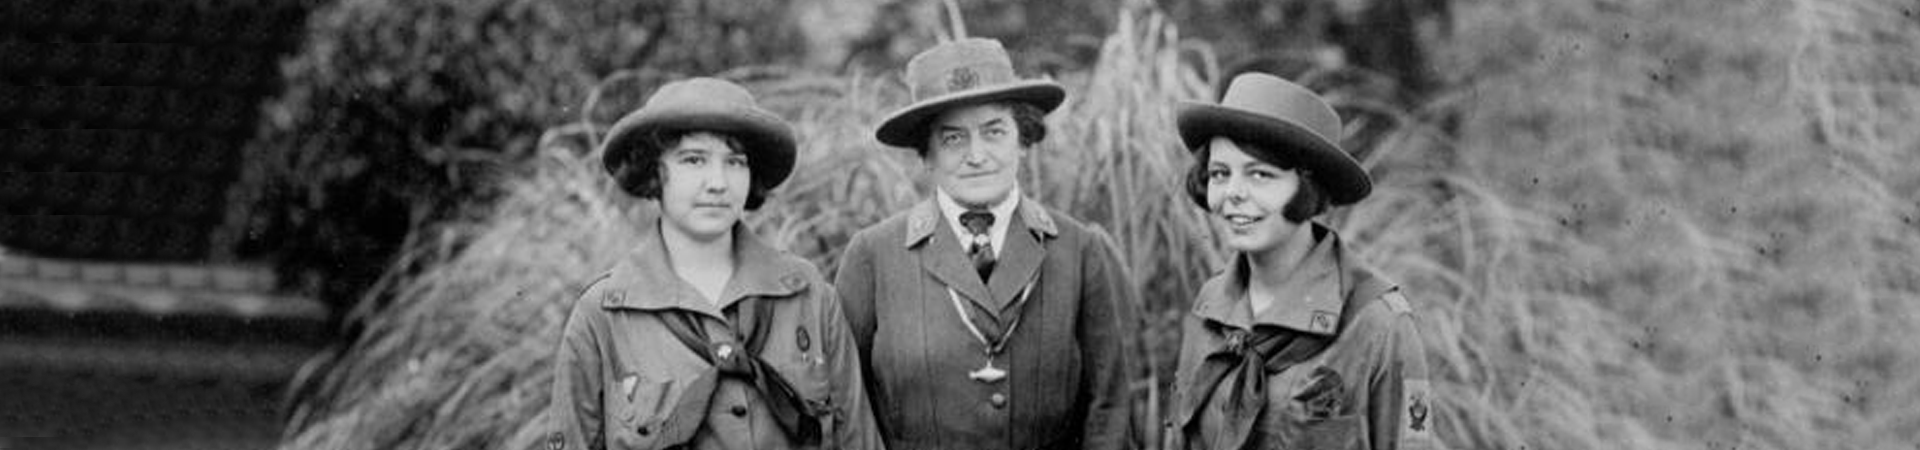 Vintage photo of Juliette Gordon Low and two other Girl Scouts